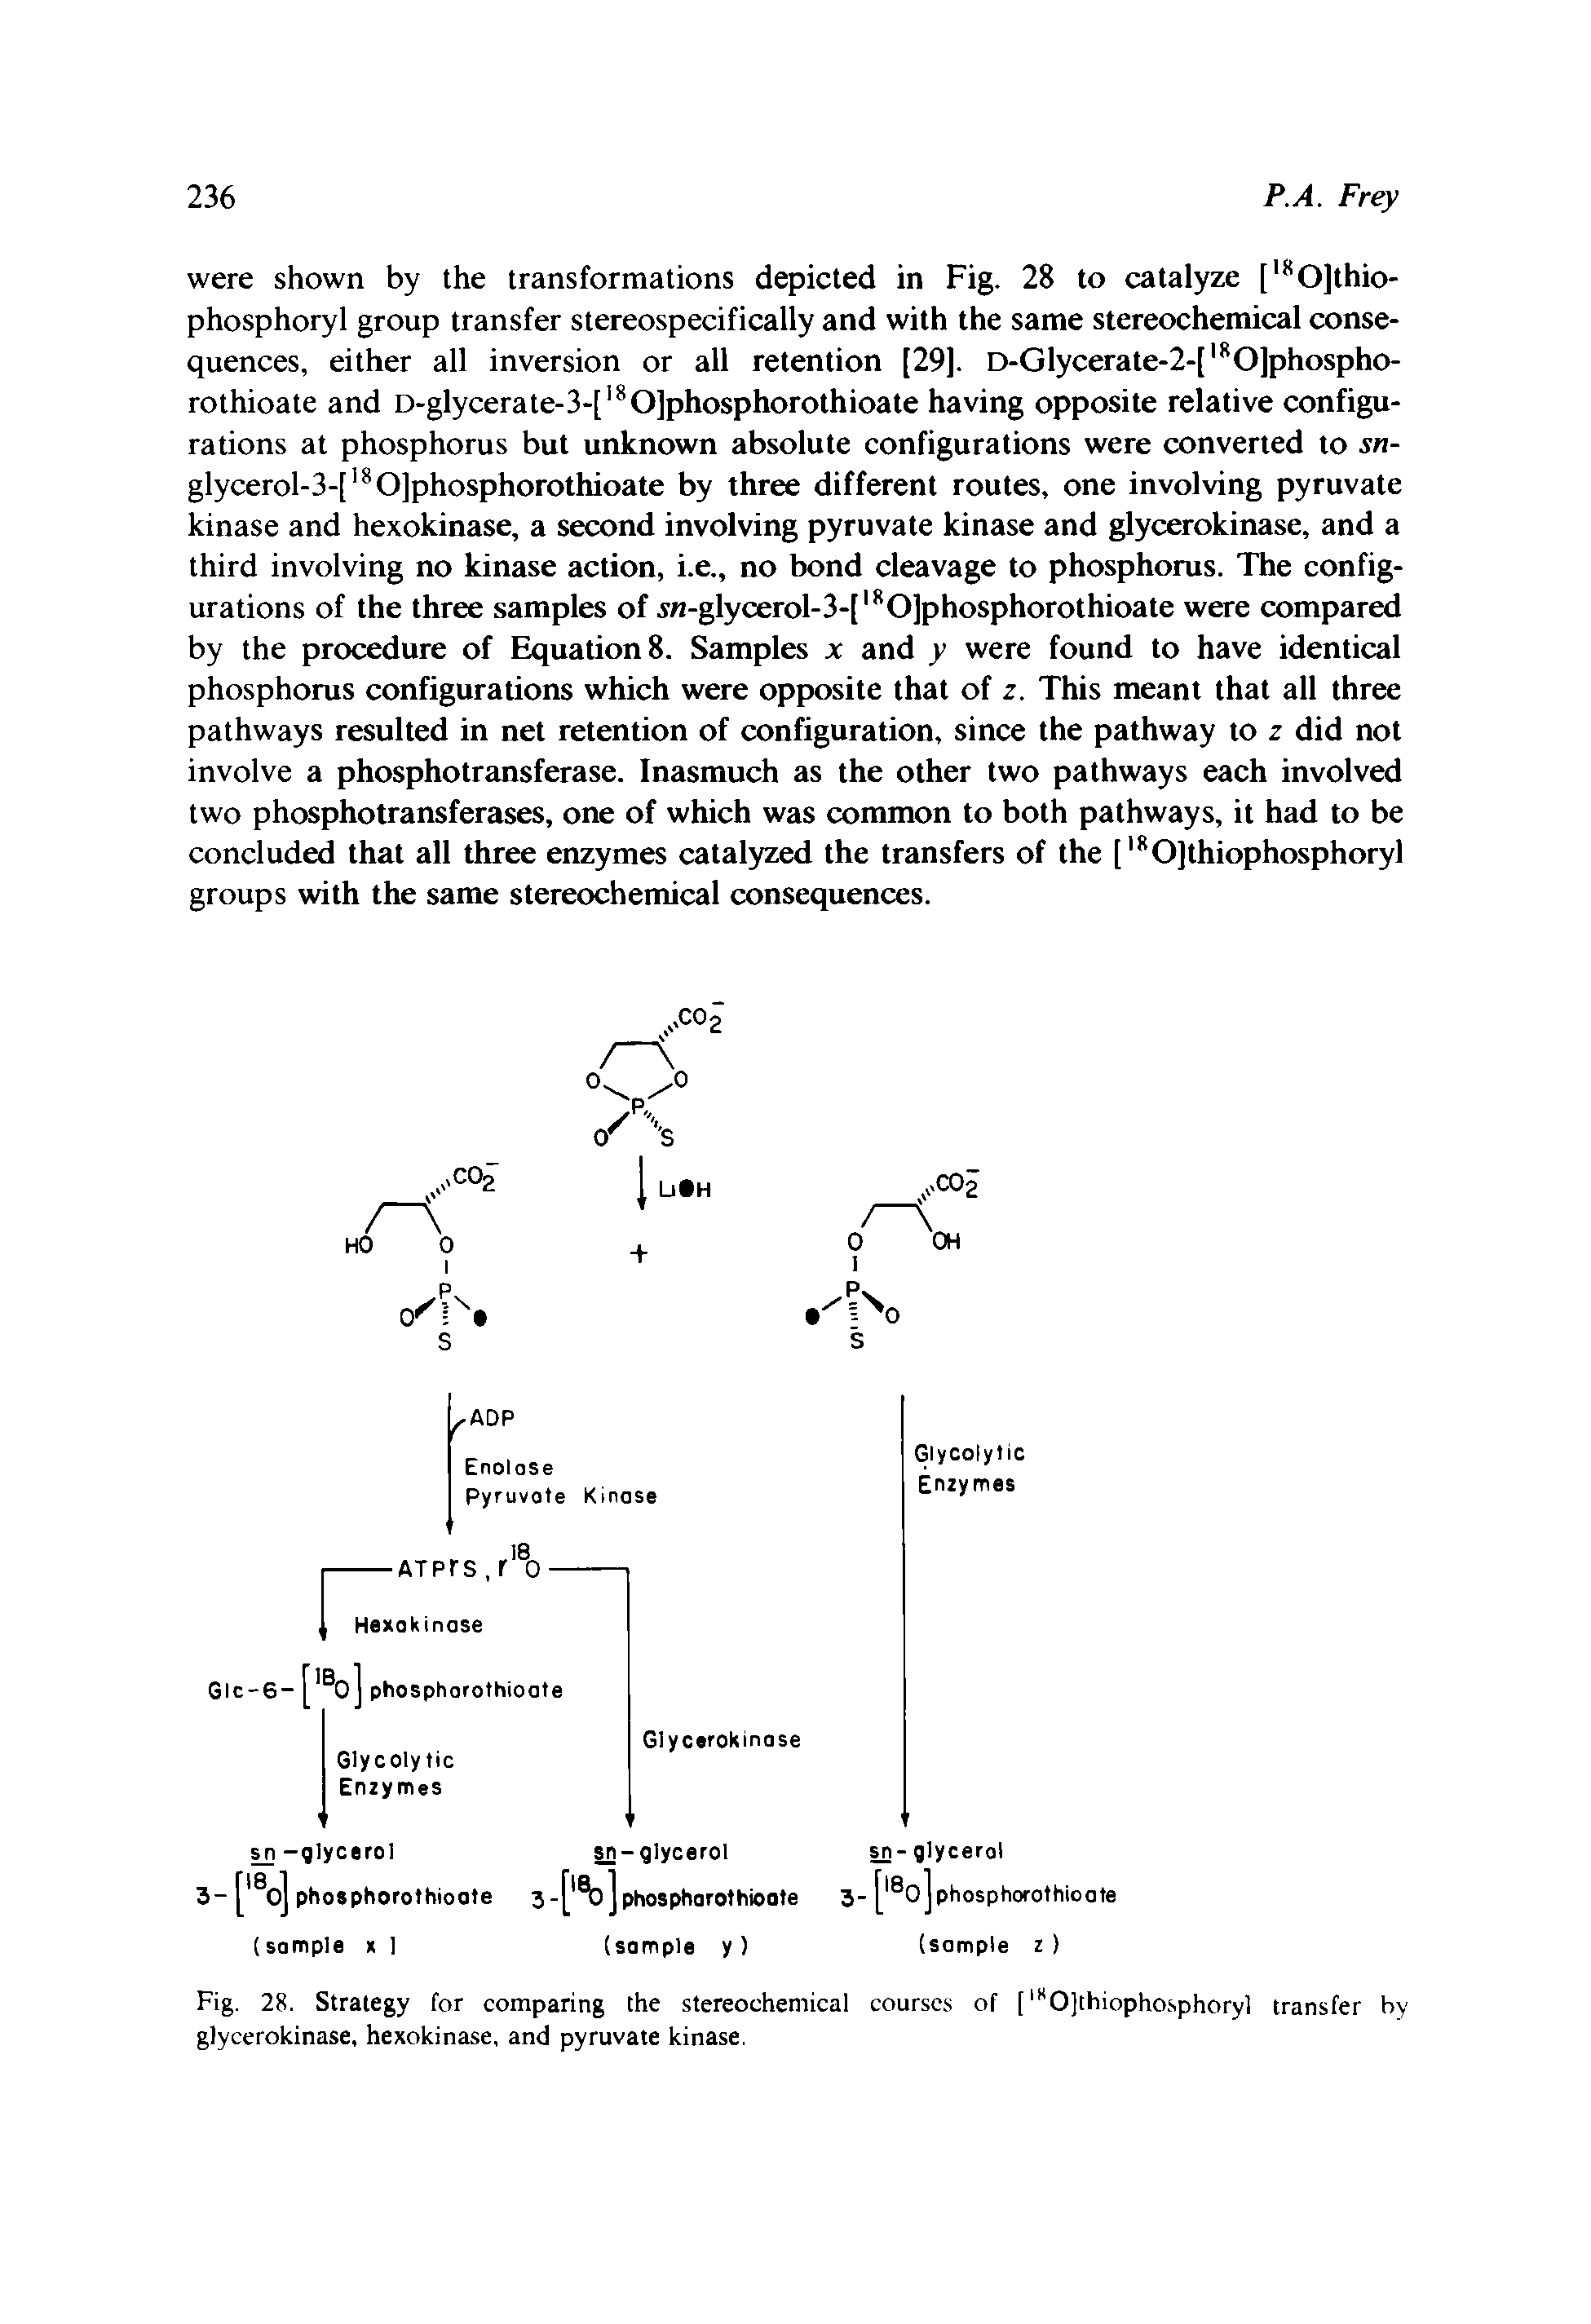 Fig. 28. Strategy for comparing the stereochemical courses of [ lsO]thiophosphoryl transfer by glycerokinase, hexokinase, and pyruvate kinase.